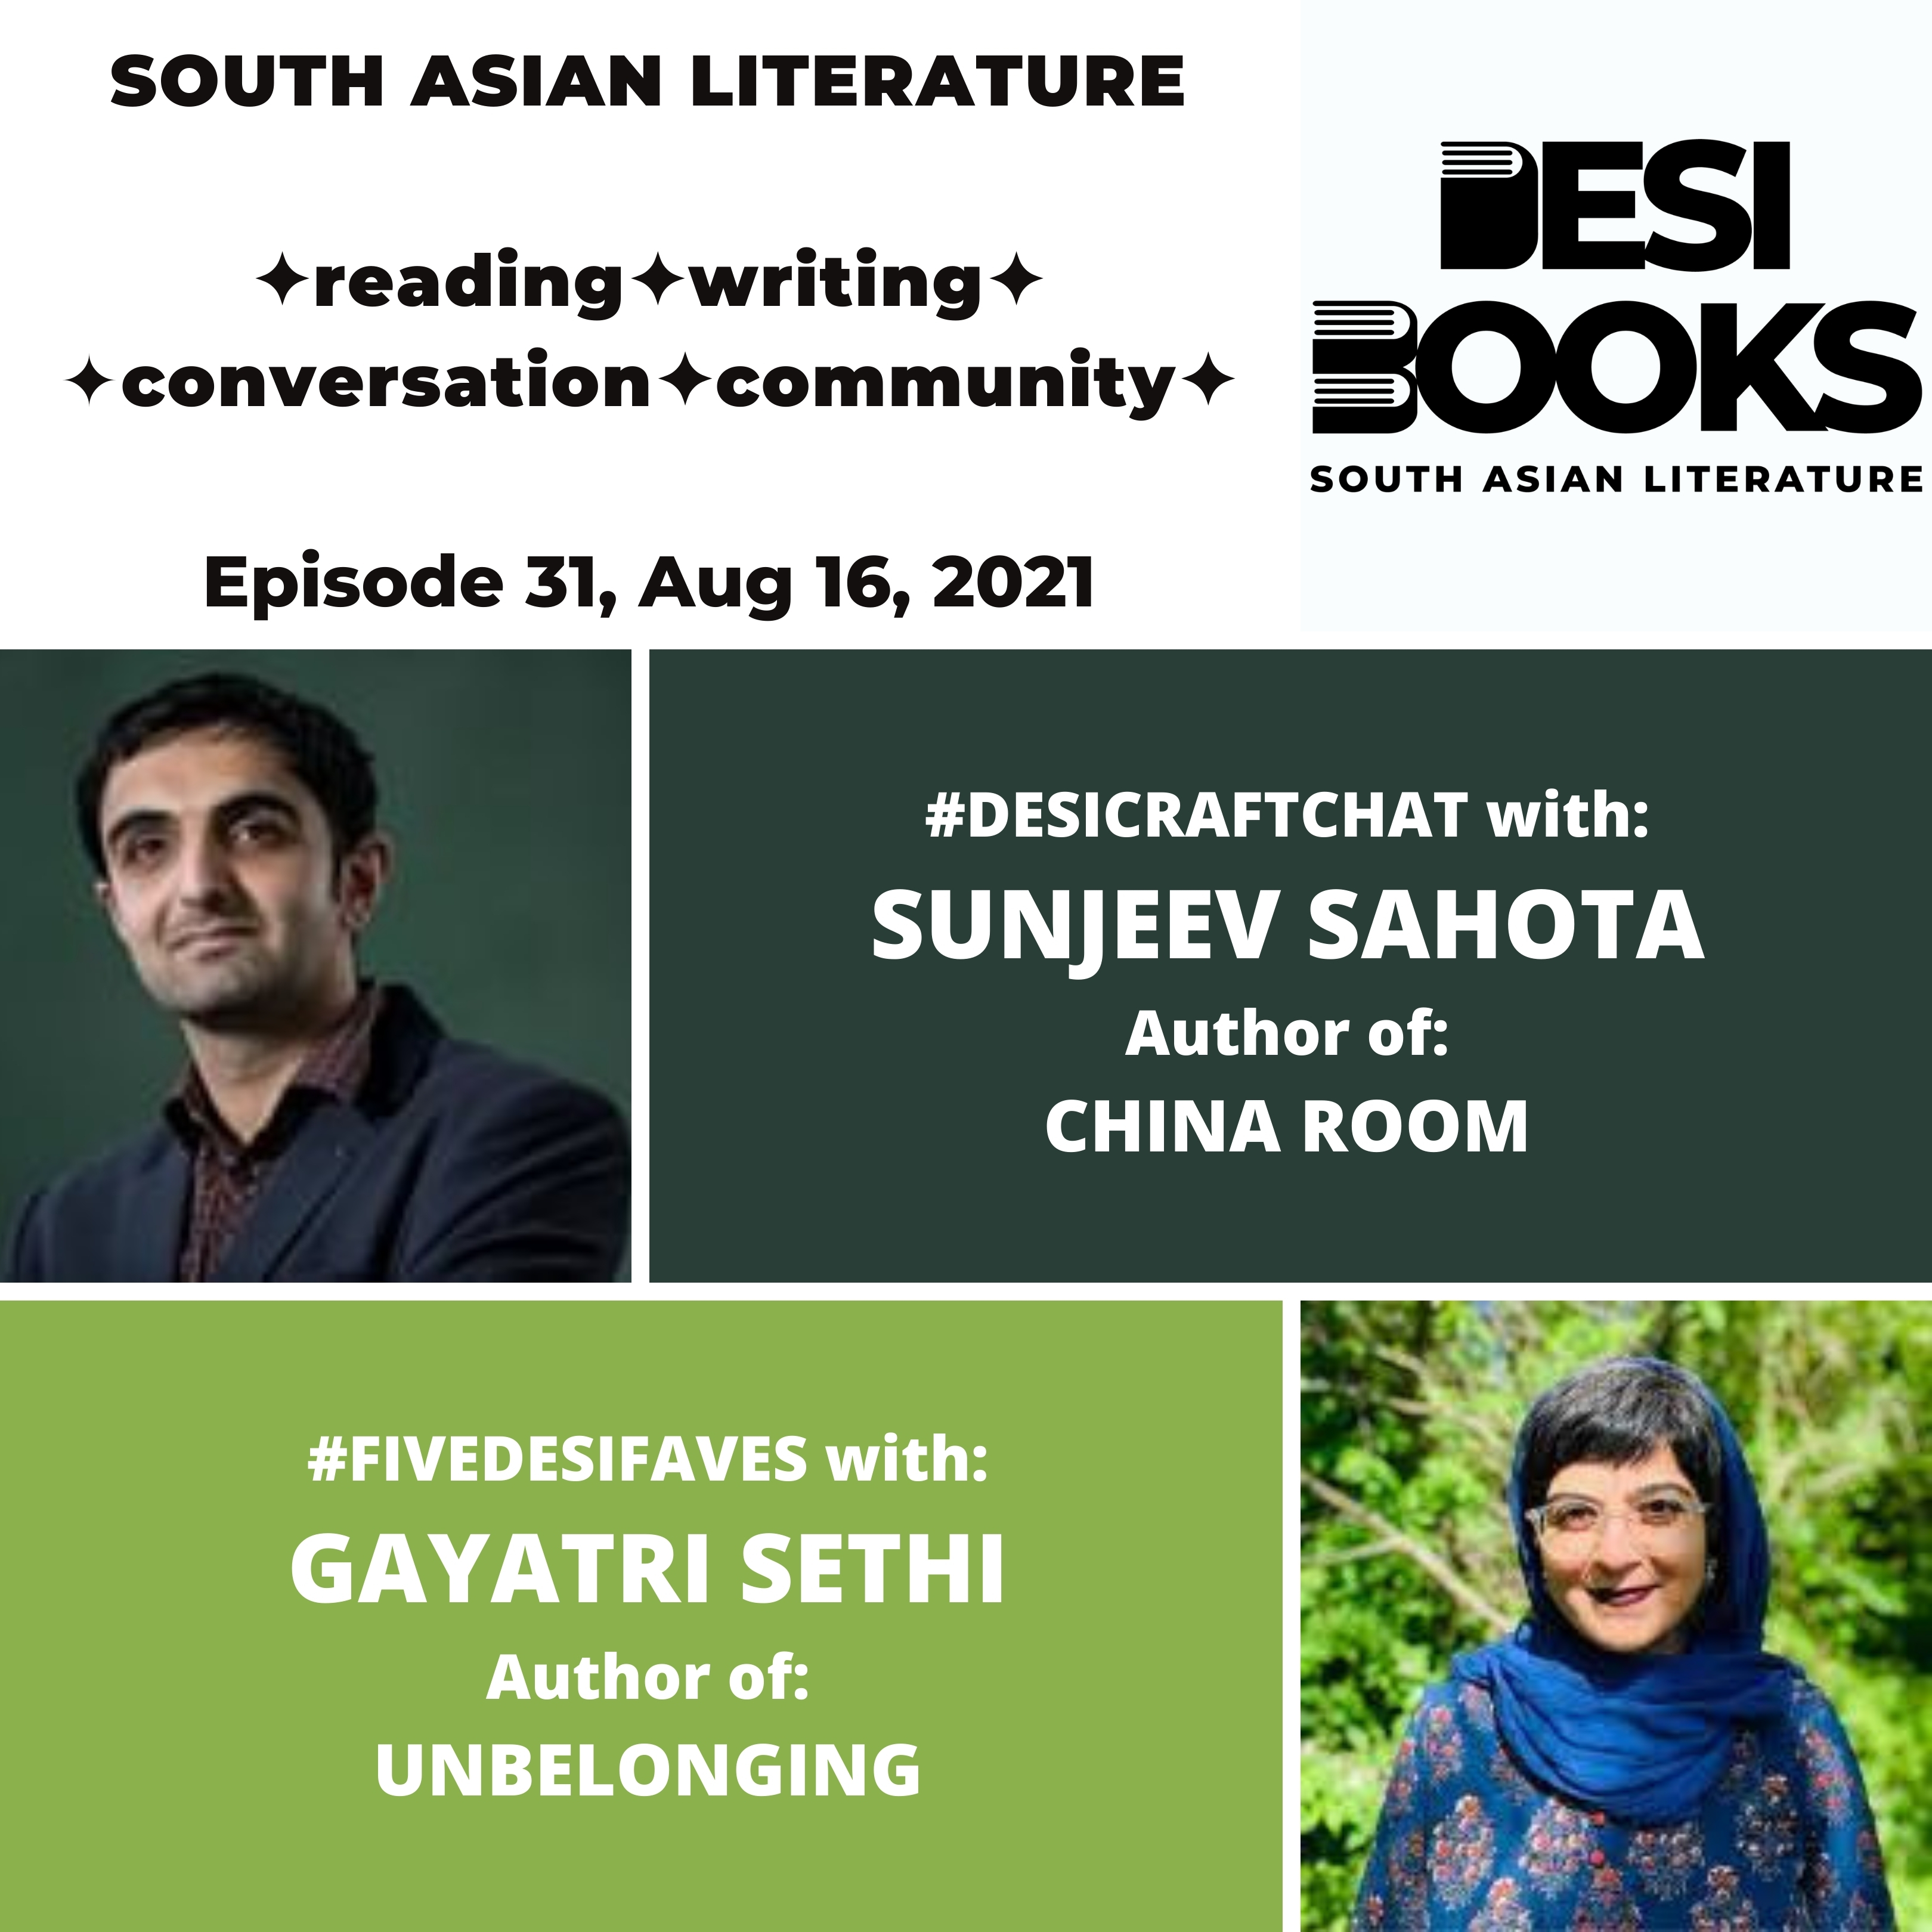 #DesiCraftChat: Sunjeev Sahota on braided narratives in historical fiction; #FiveDesiFaves: Gayatri Sethi on her favorite desi books by women writers